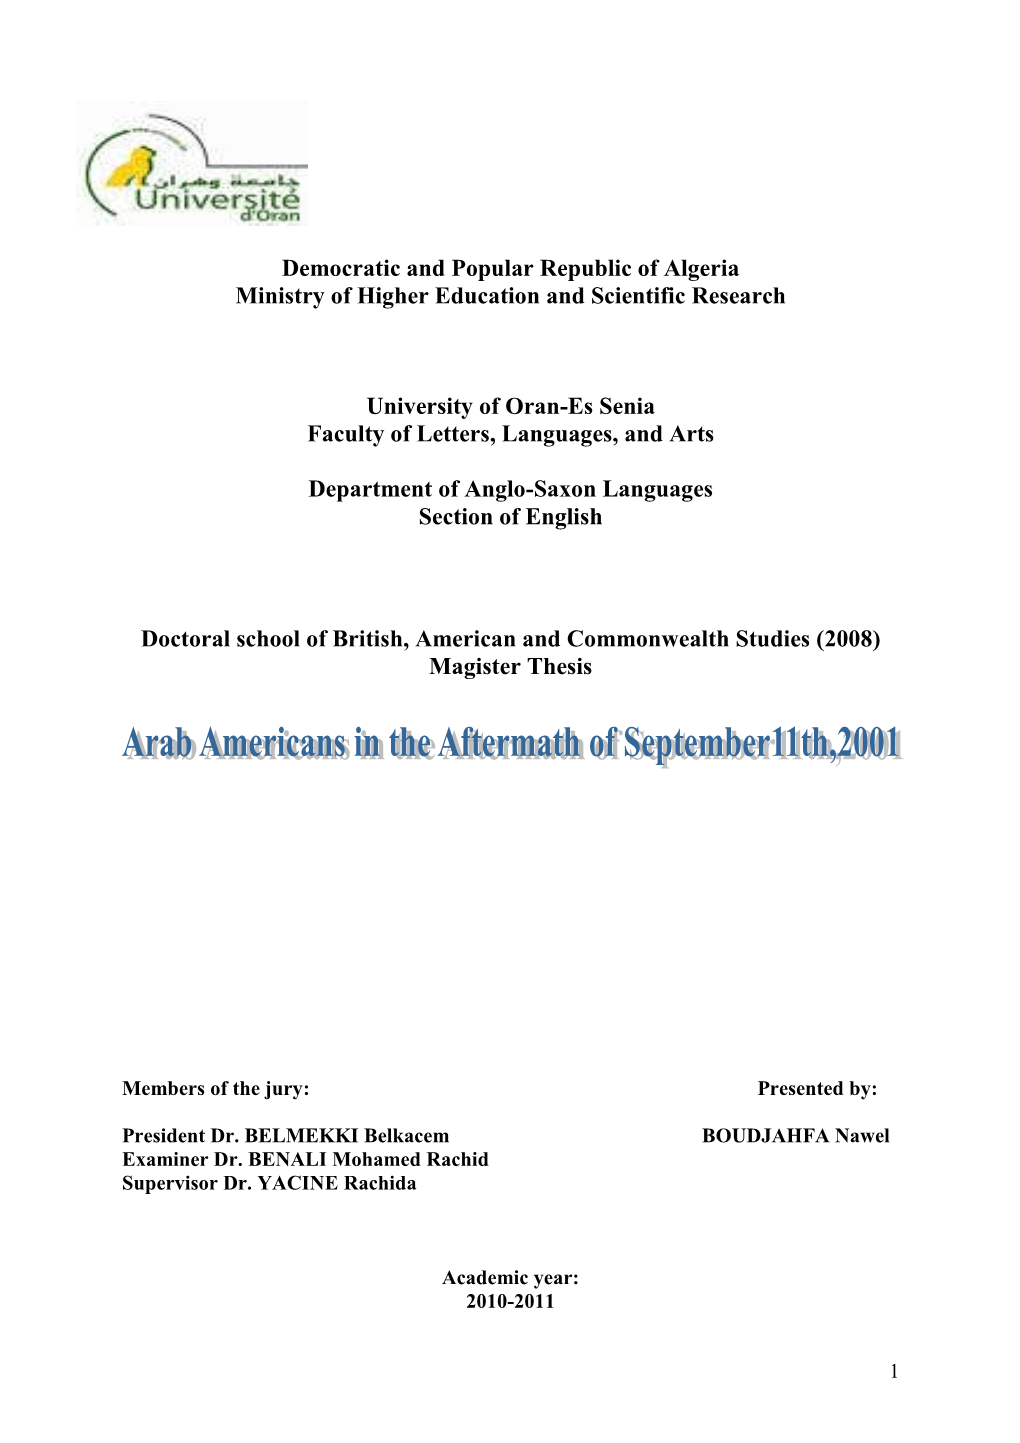 Democratic and Popular Republic of Algeria Ministry of Higher Education and Scientific Research